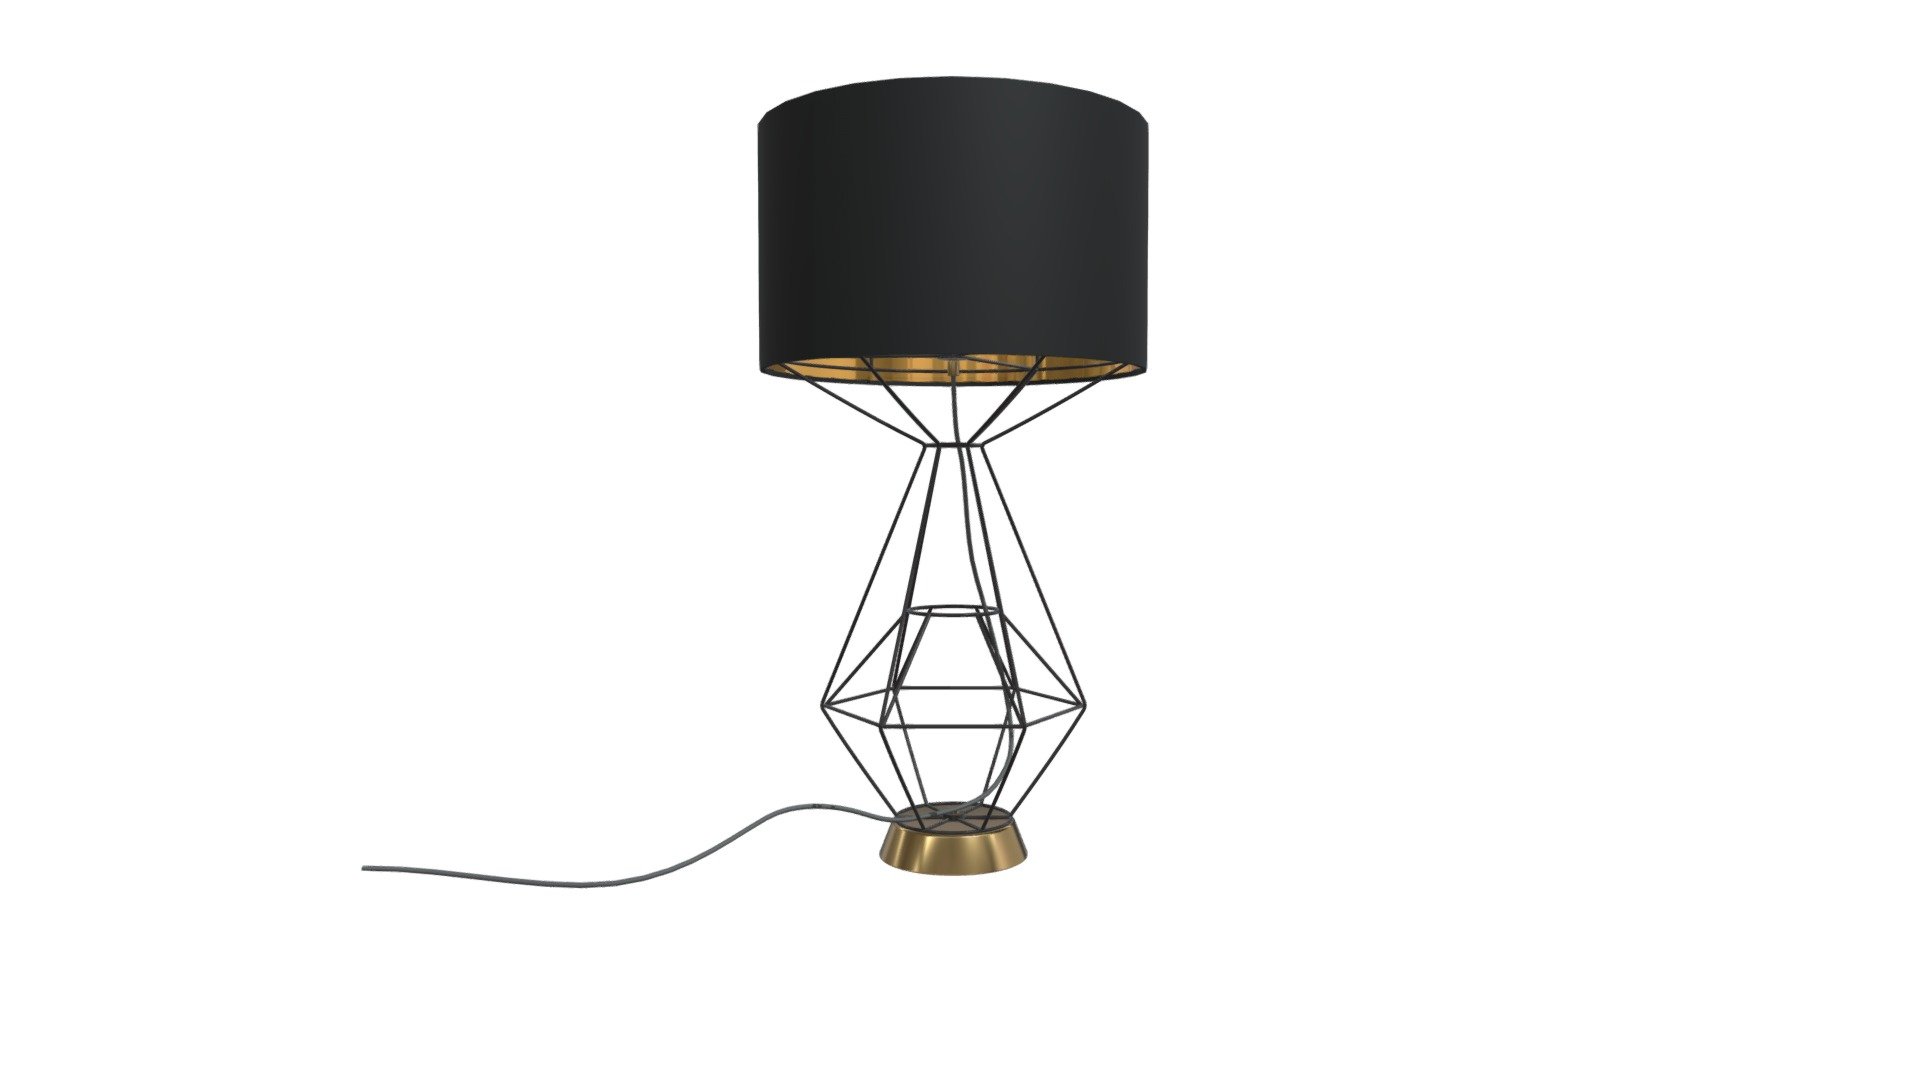 An architectural bent gives this table lamp a place in any well-designed home. Its open construction exposes its structural supports and gives it an airy feel. Topped with a dramatic black drum shade with a glamorous gold liner, its stunning. https://zuomod.com/Delancey-Table-Lamp-Black - Delancey Table Lamp Black - 56086 - Buy Royalty Free 3D model by Zuo Modern (@zuo) 3d model